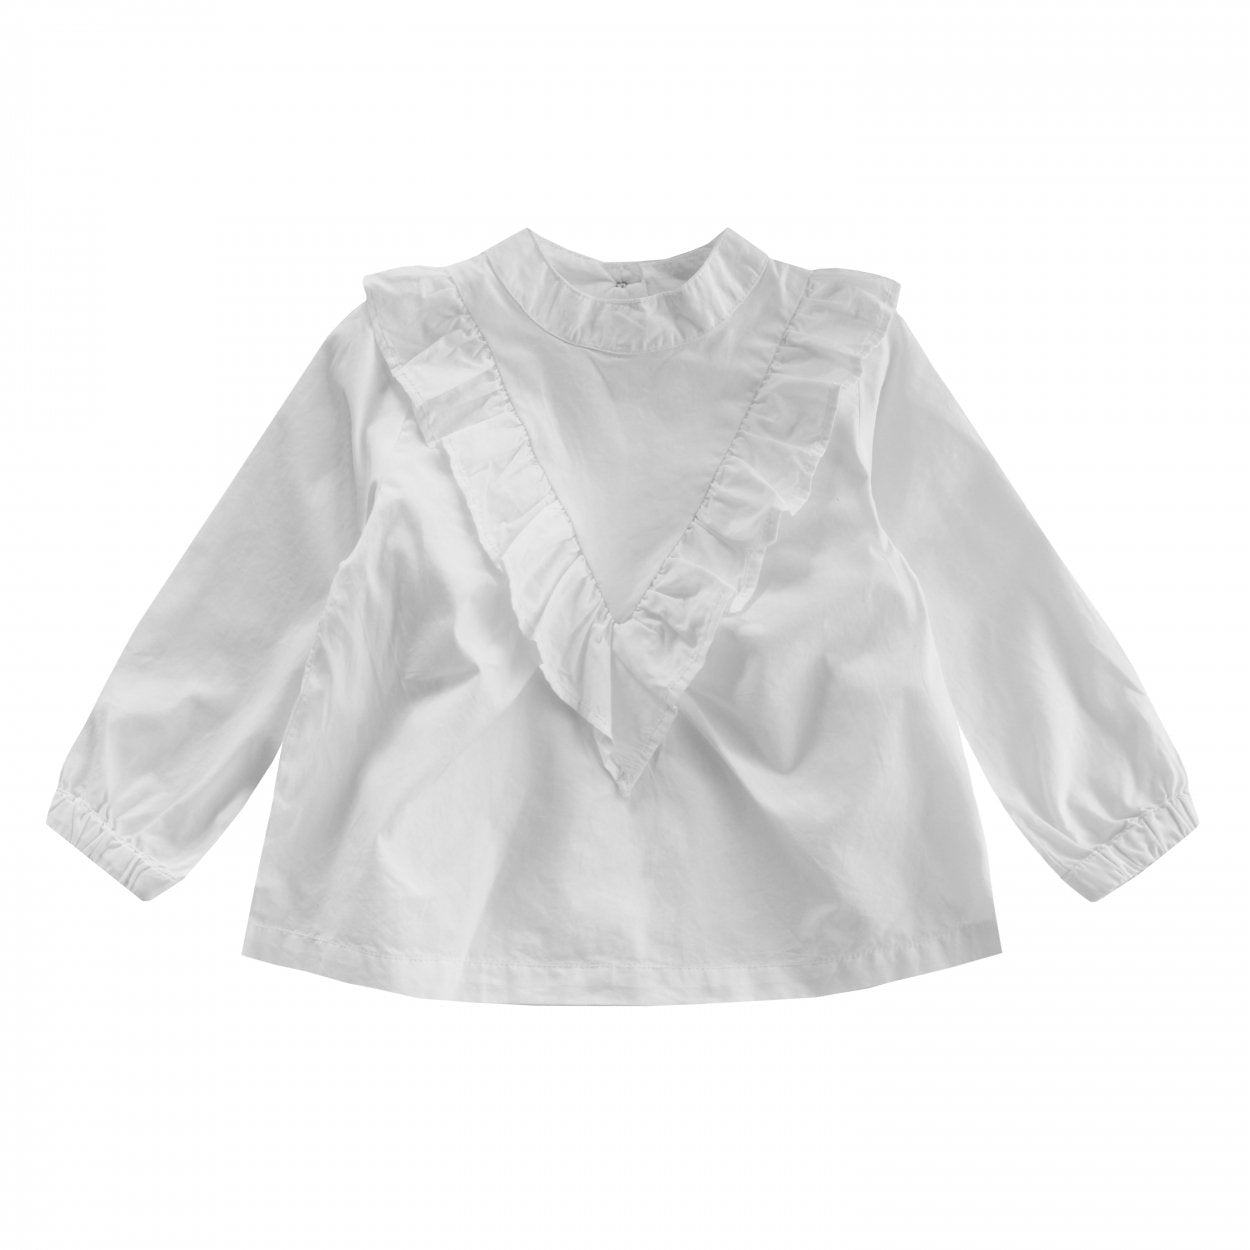 Meisjes Blouse Ruffle - Cynthia - off white van Your Wishes in de kleur Off-White in maat 134/140.